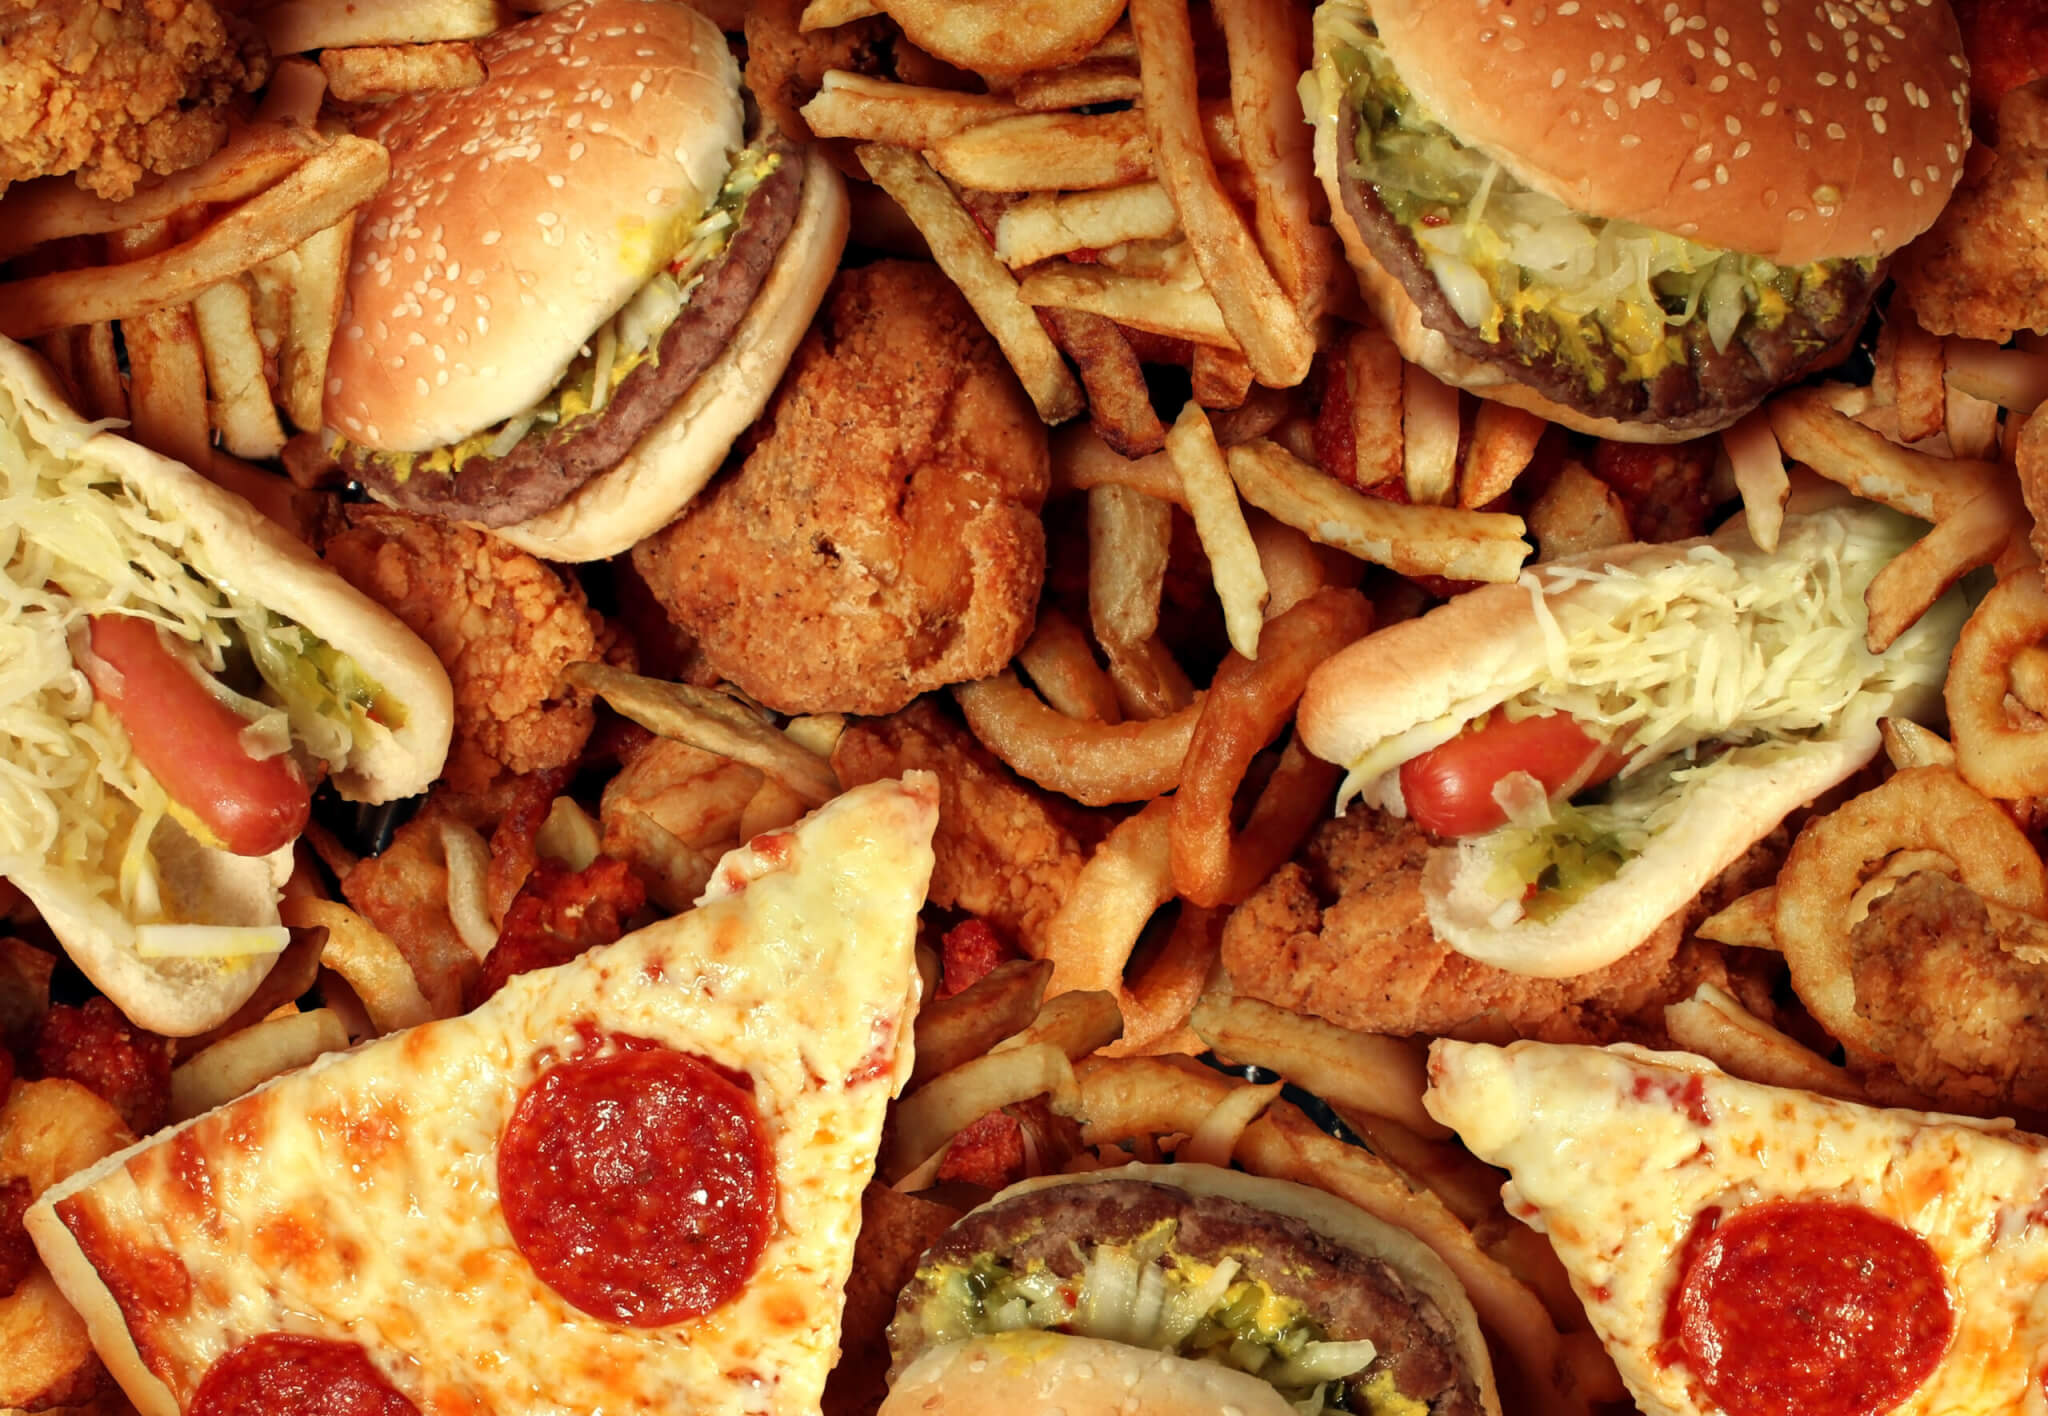 National Junk Food Day (July 21st) | Days Of The Year